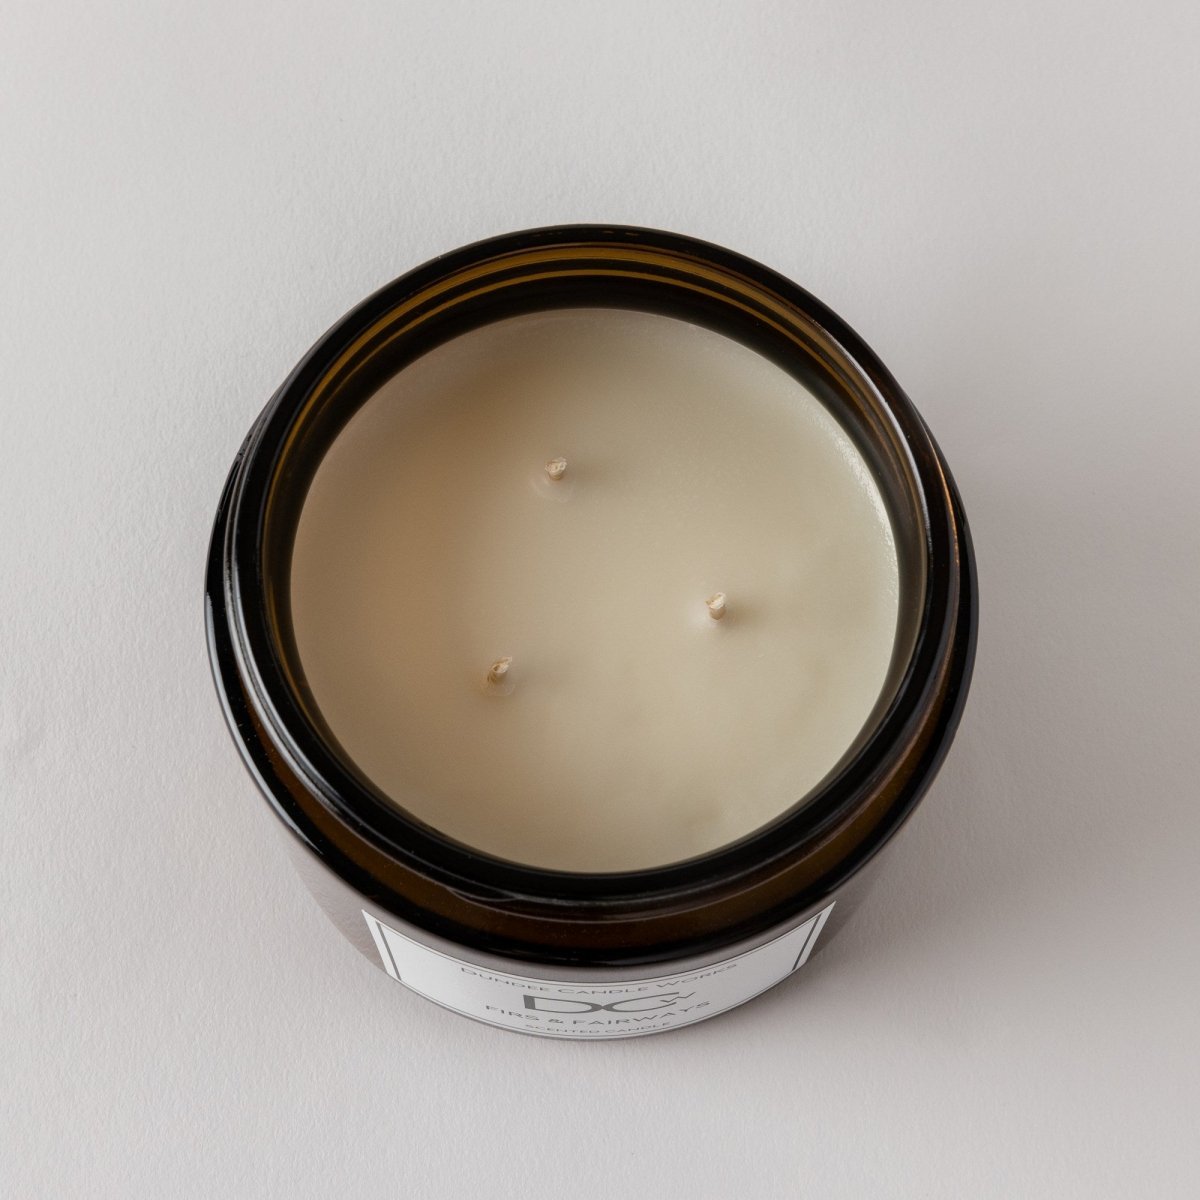 Marmalade & Lime Scented Candle 500ml - Dundee Candle Works